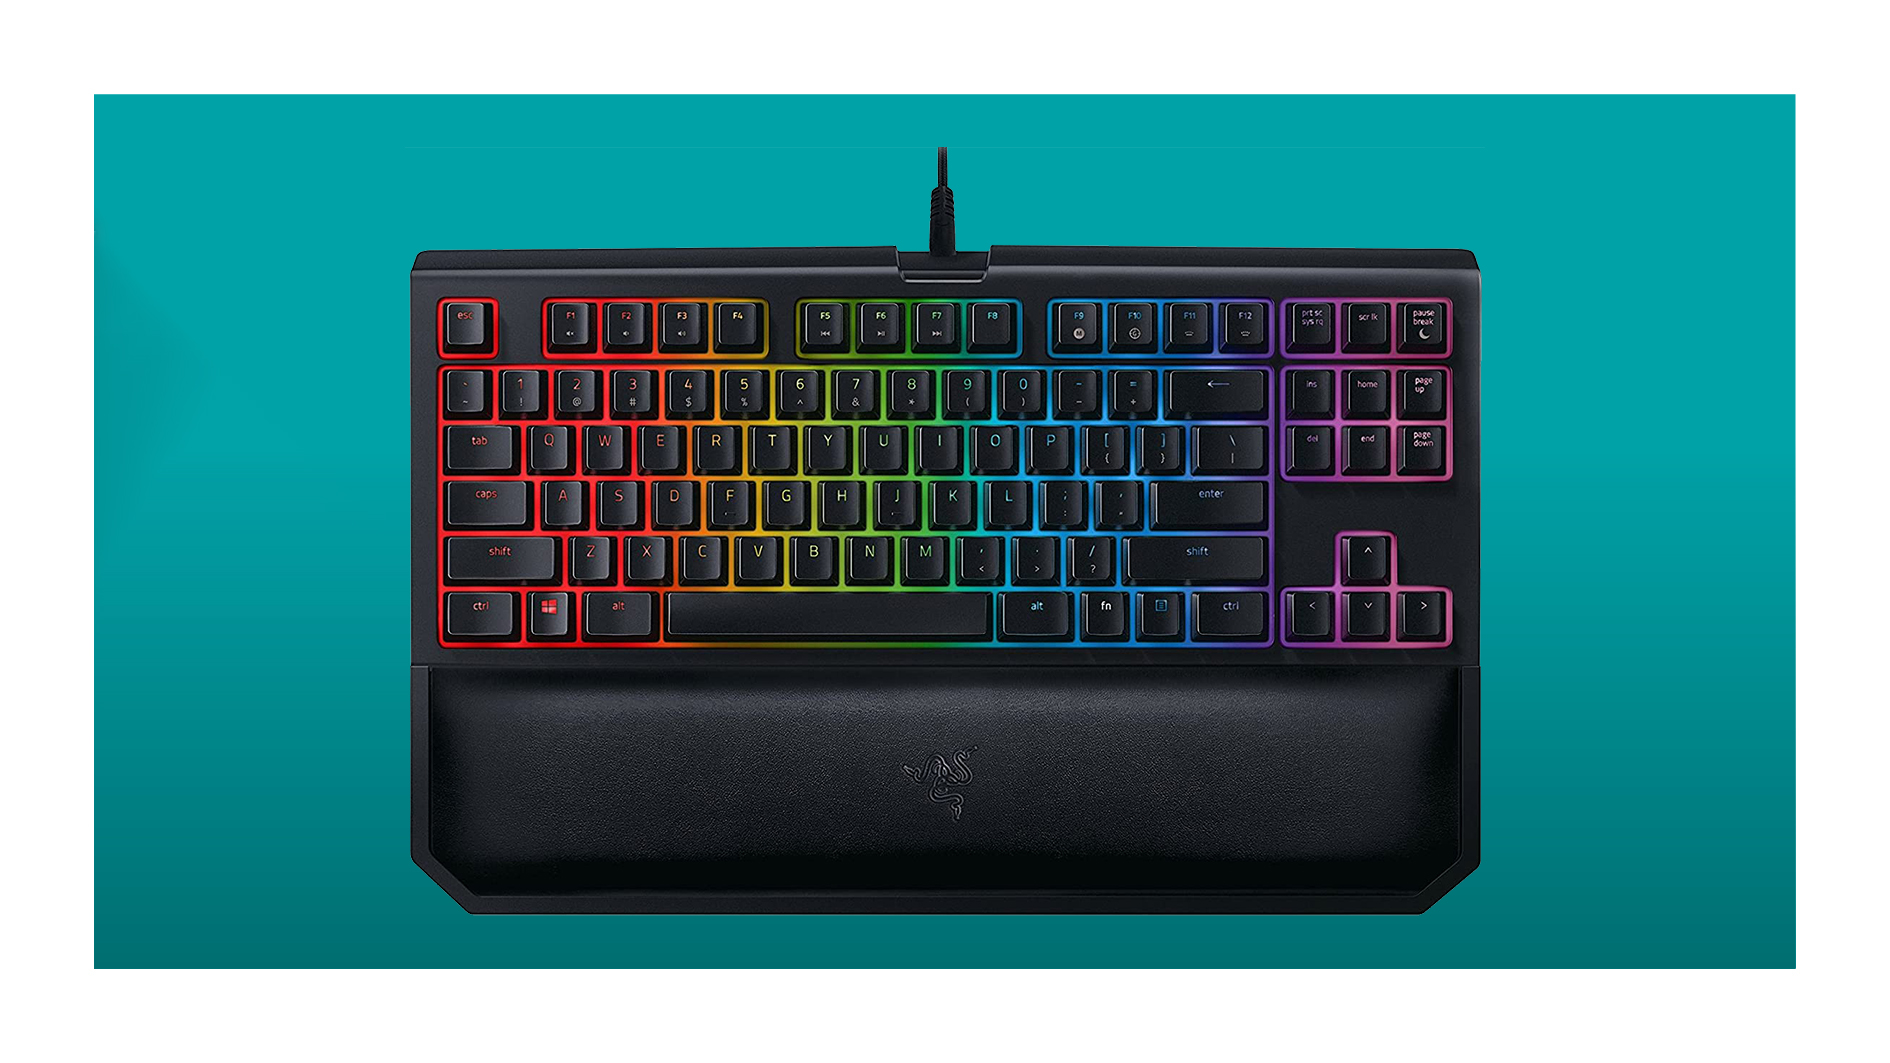  One of the most popular mechanical gaming keyboards is on sale for $60 